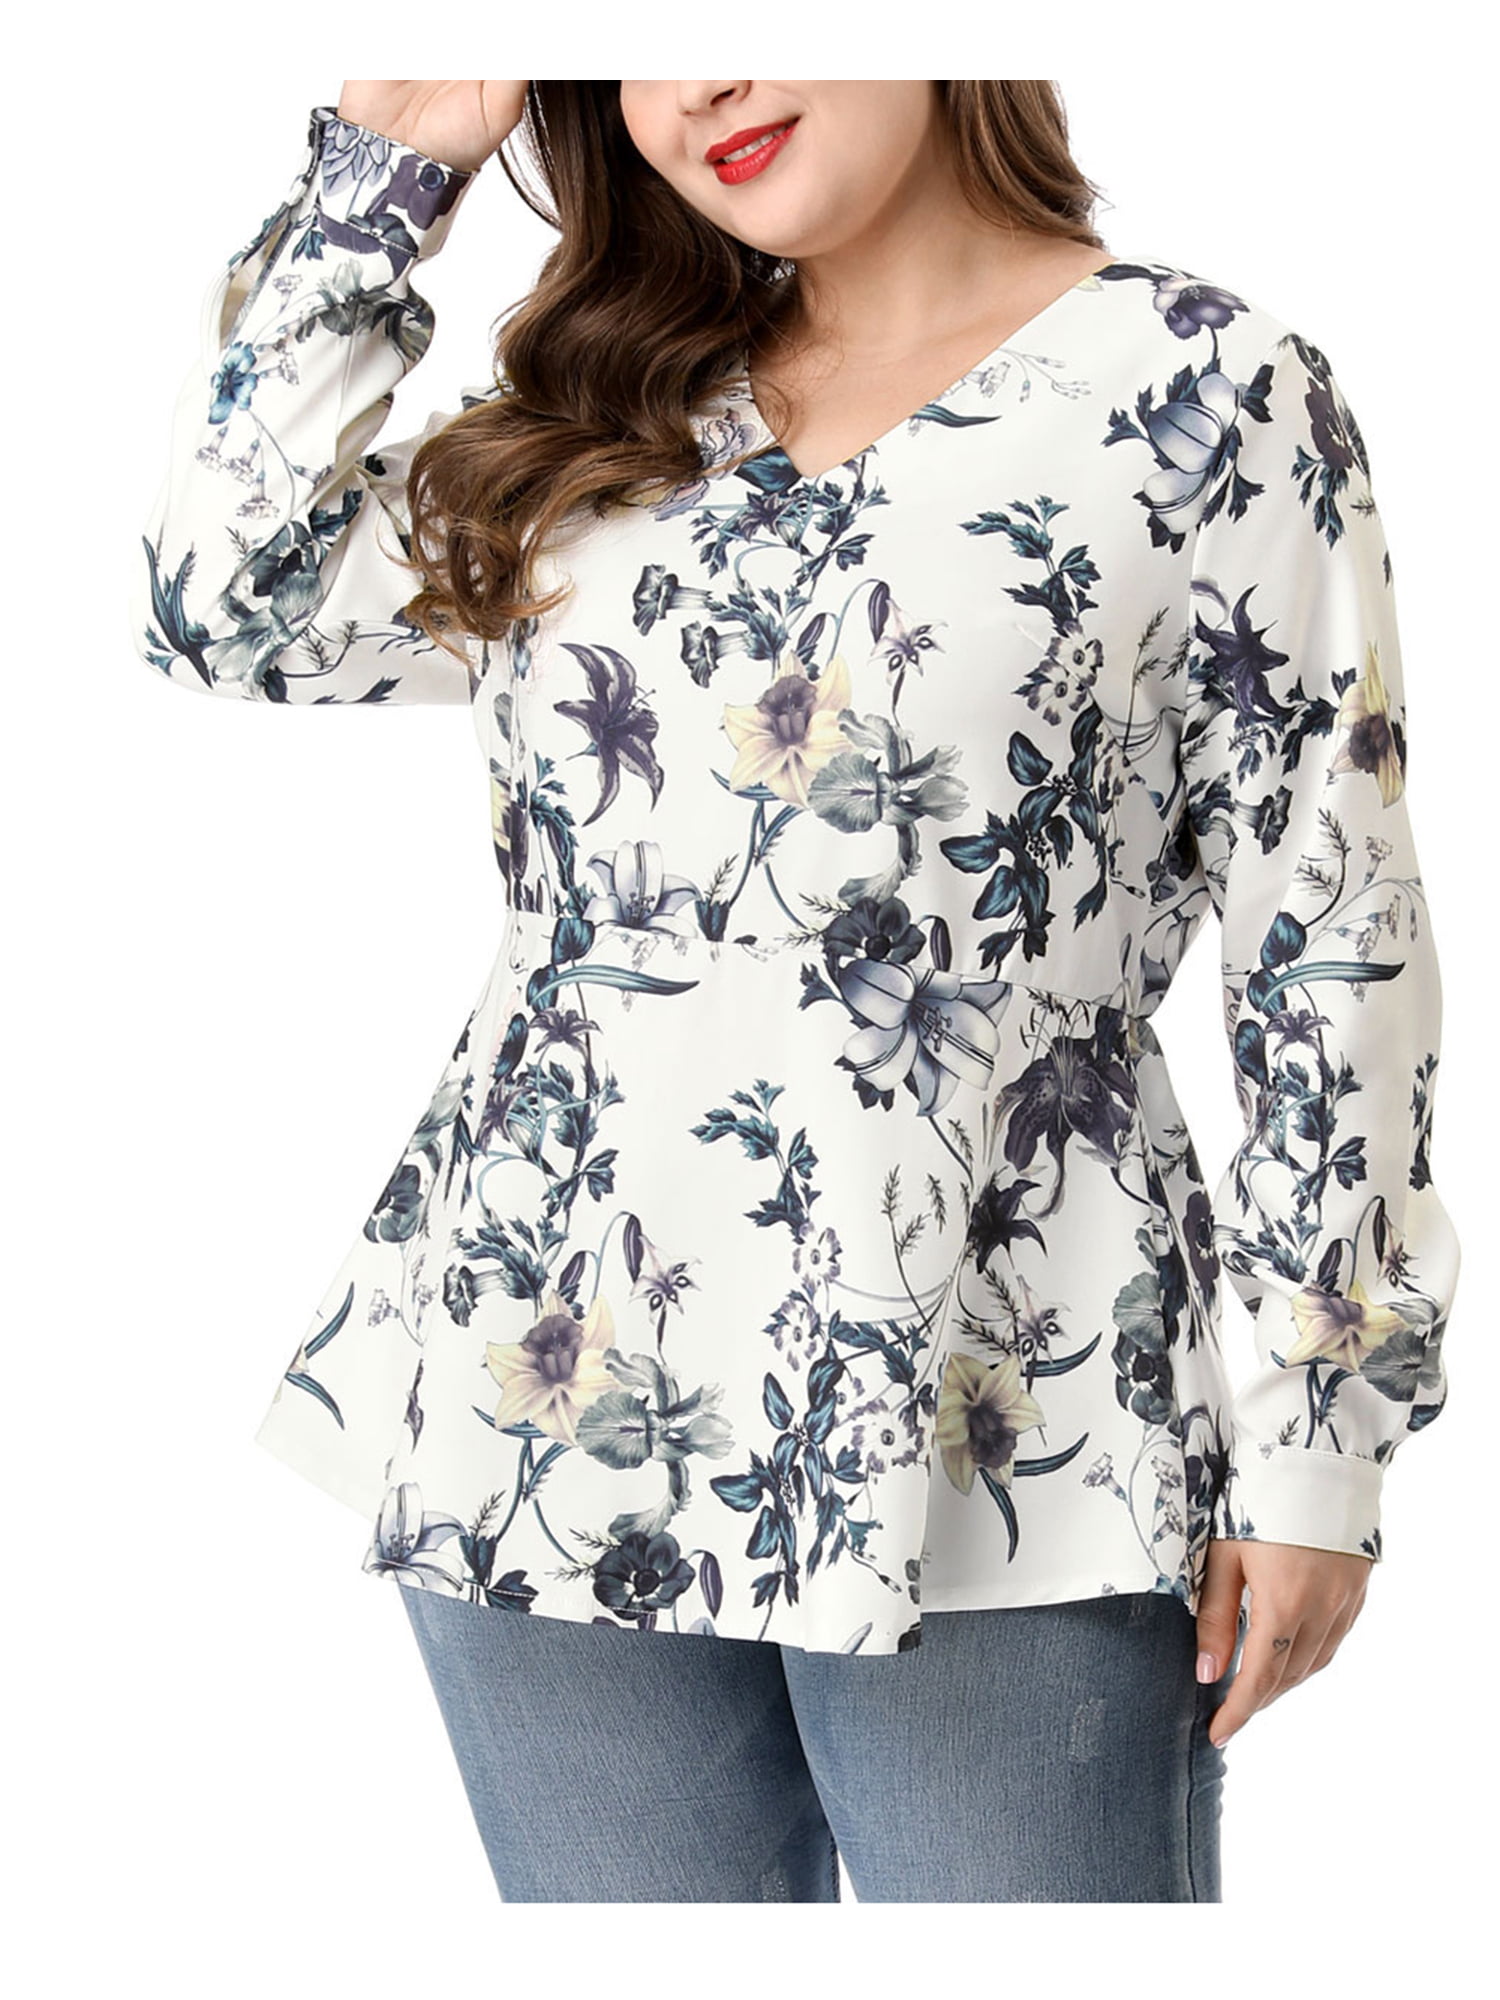 Women's Plus Size V Neck Top Long Sleeves Floral Peplum White 3X ...